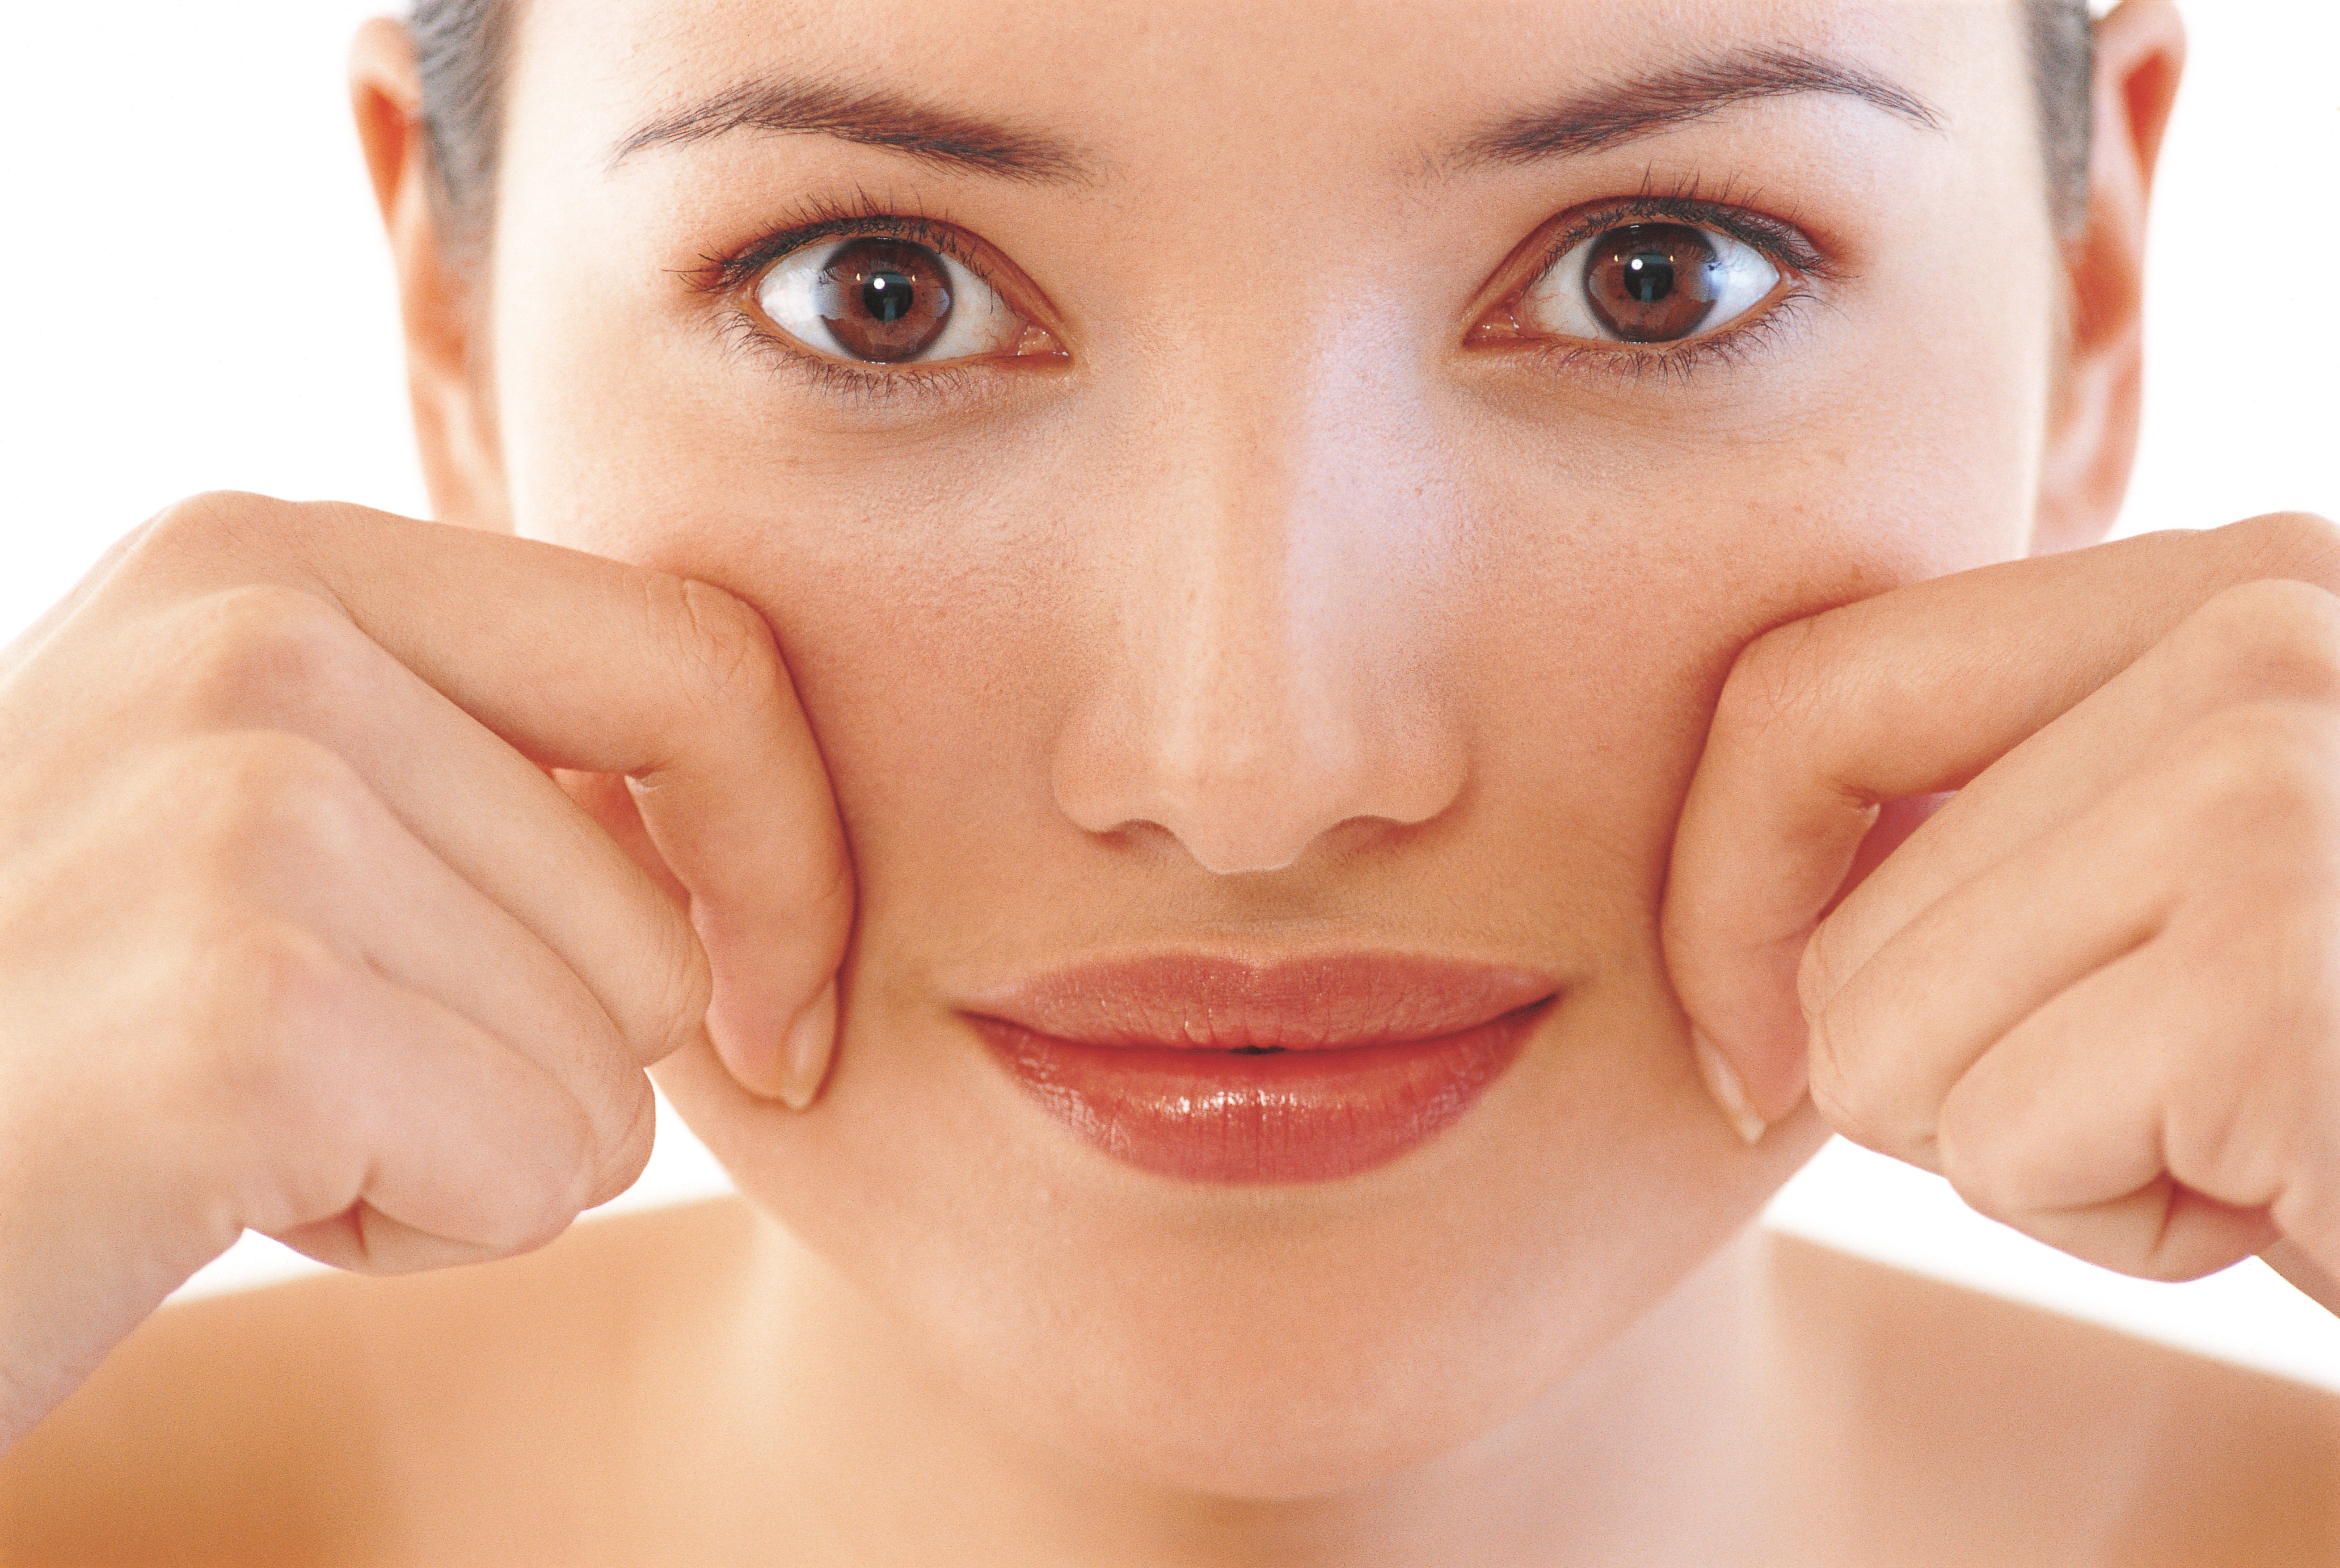 How can I increase collagen production in my skin? Image